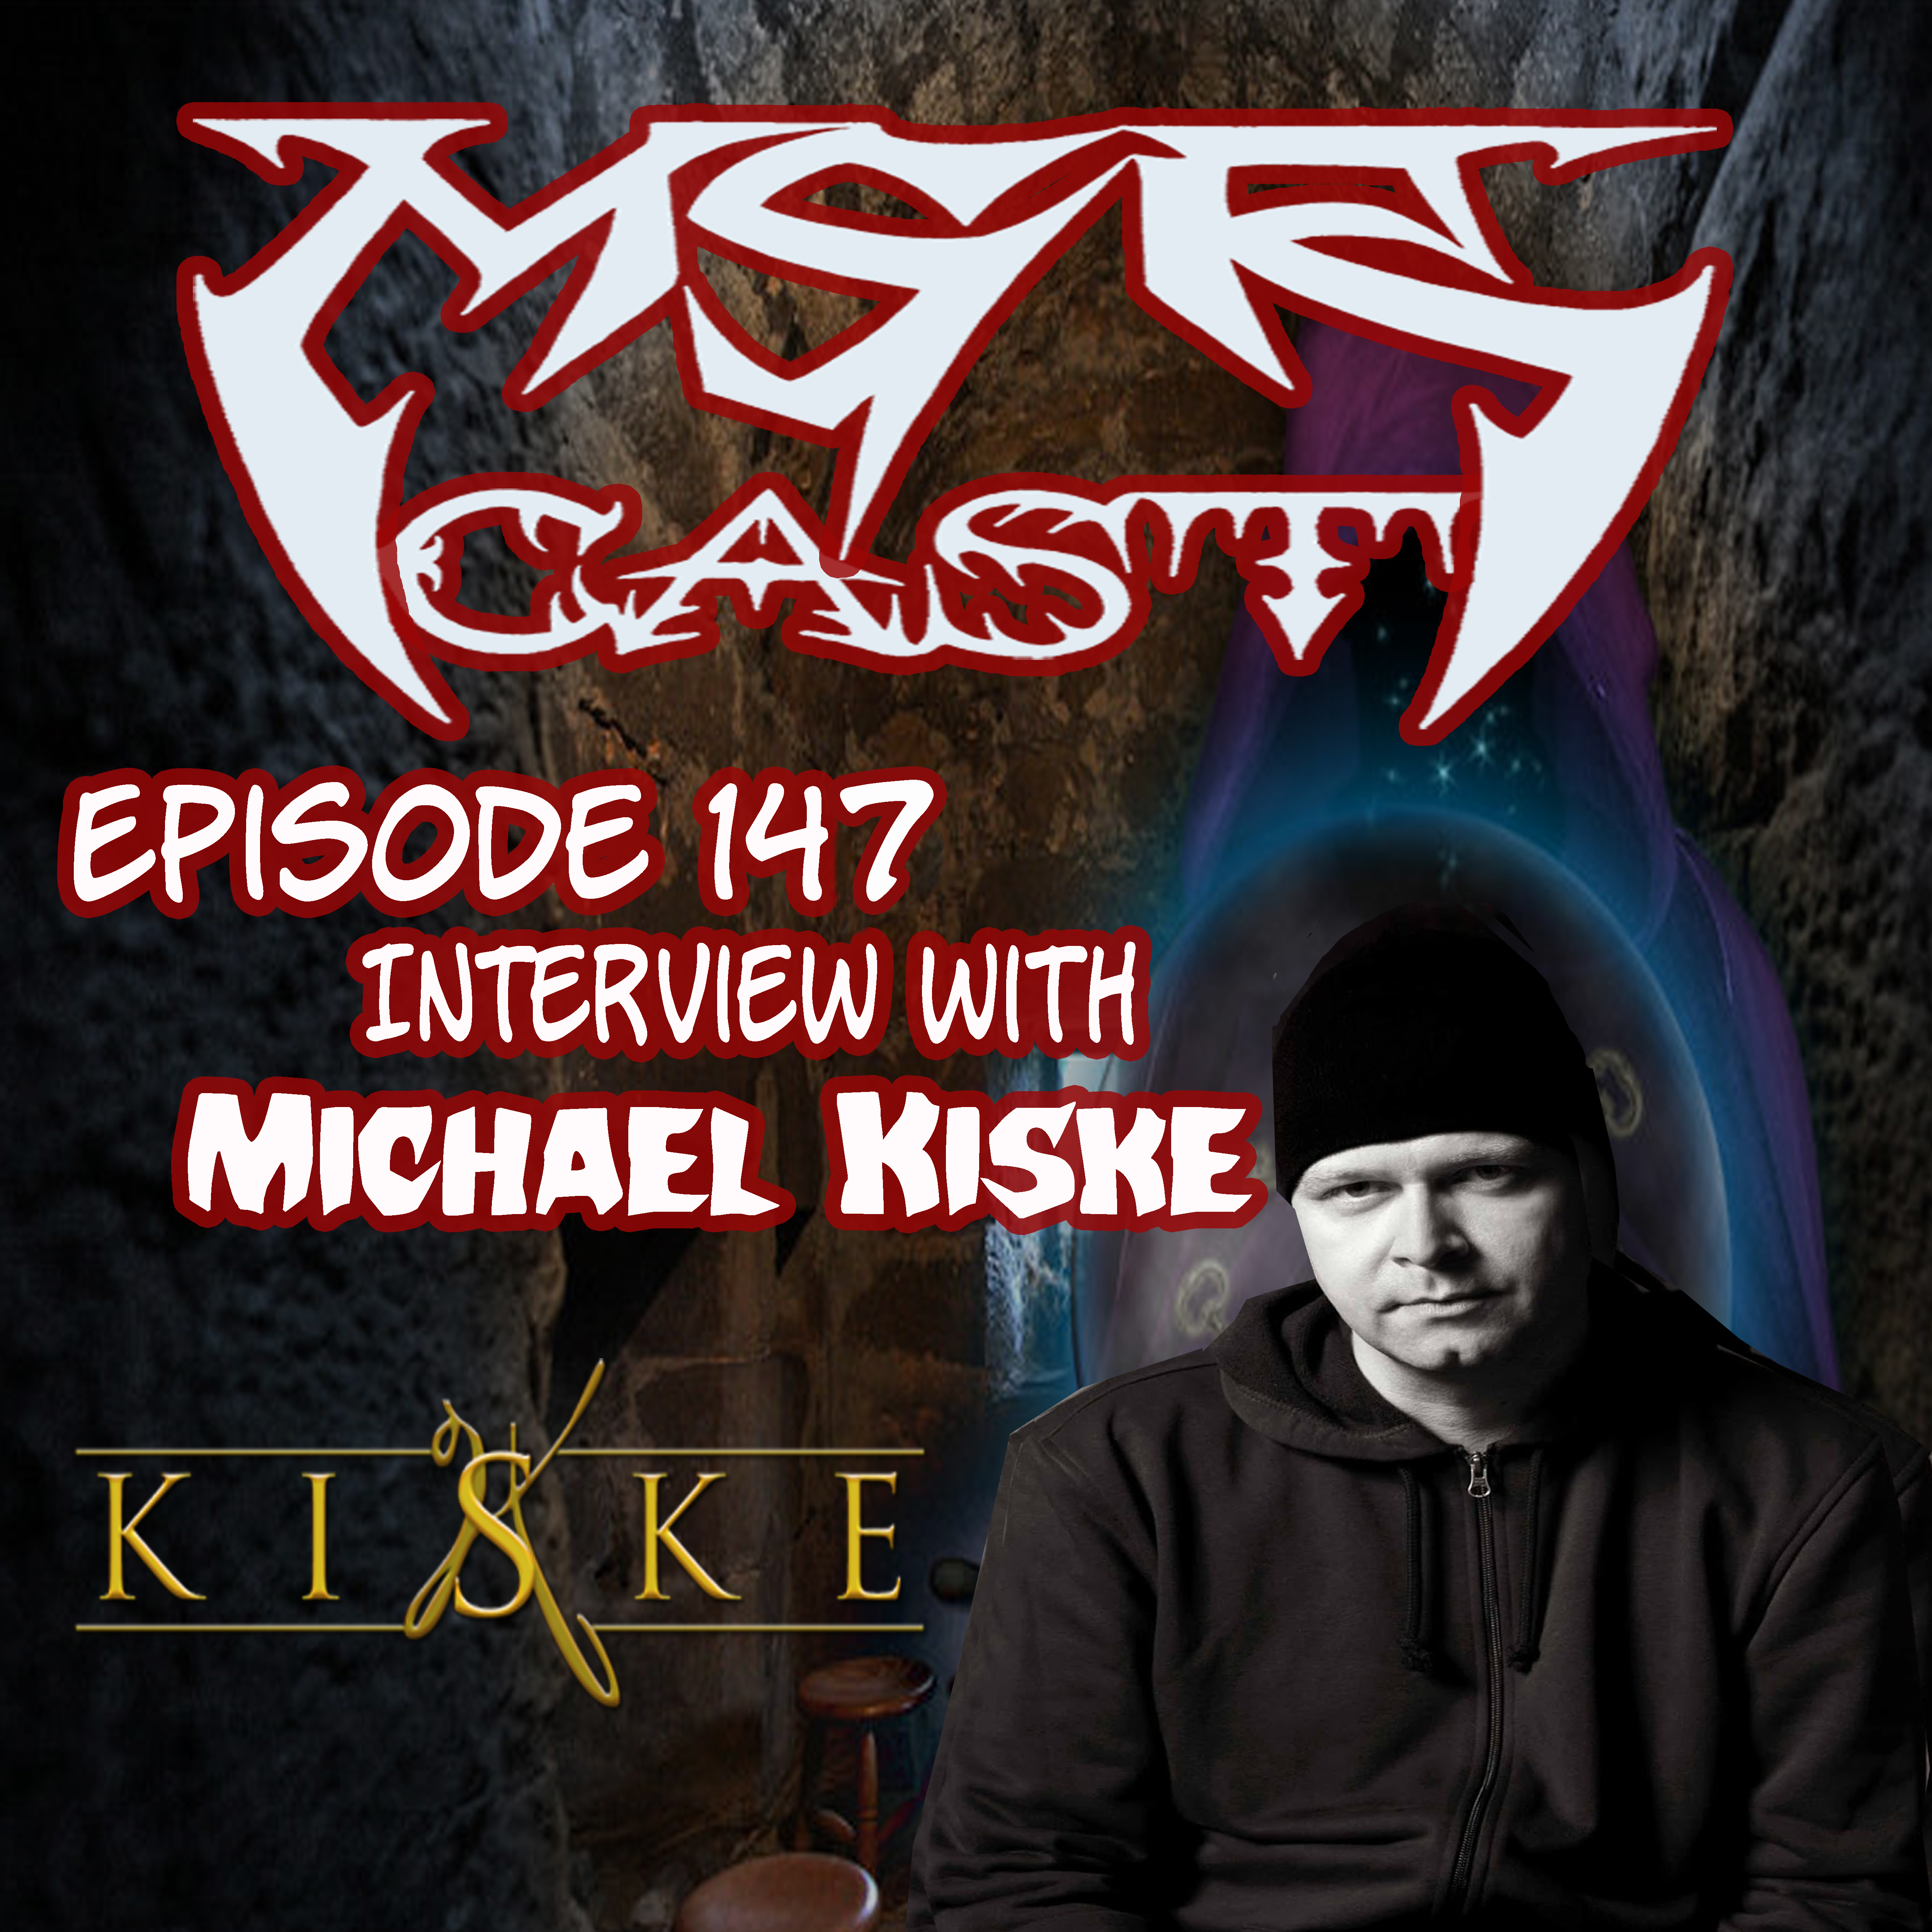 MSRcast 147: Interview with Michael Kiske